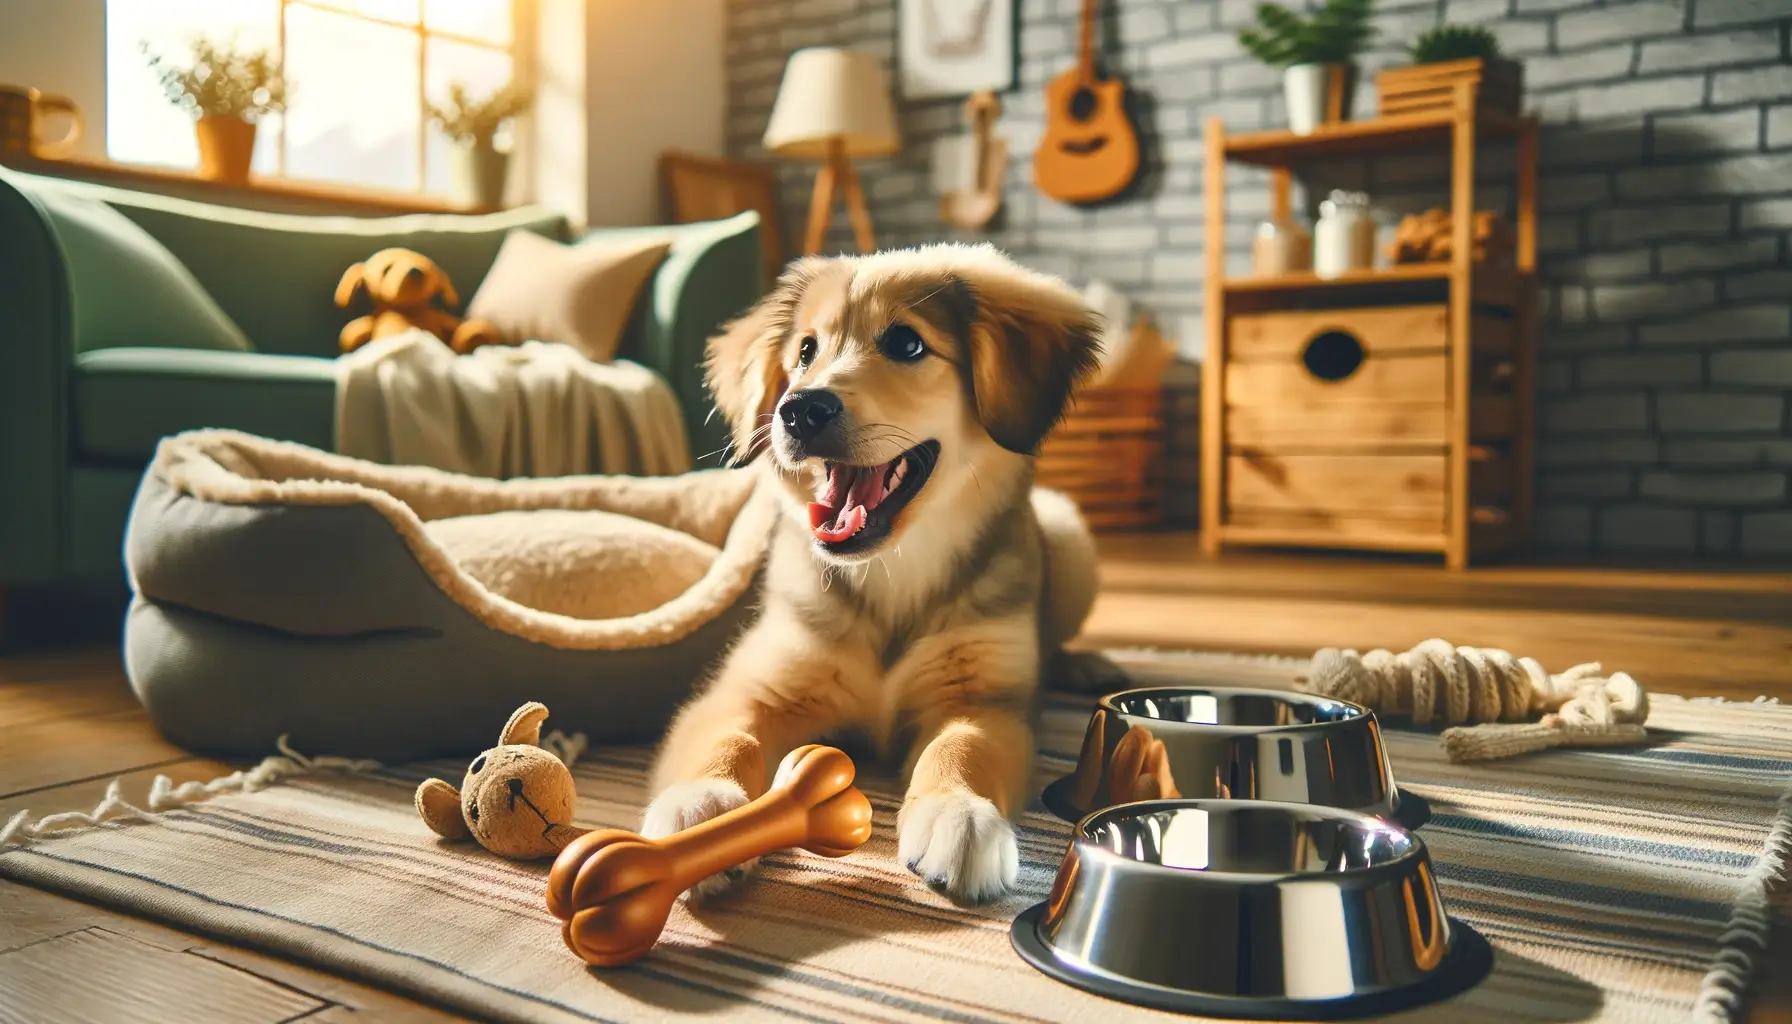 Happy puppy with essential pet supplies in a cozy home setting, including chew toys, a dog bed, and food bowls.